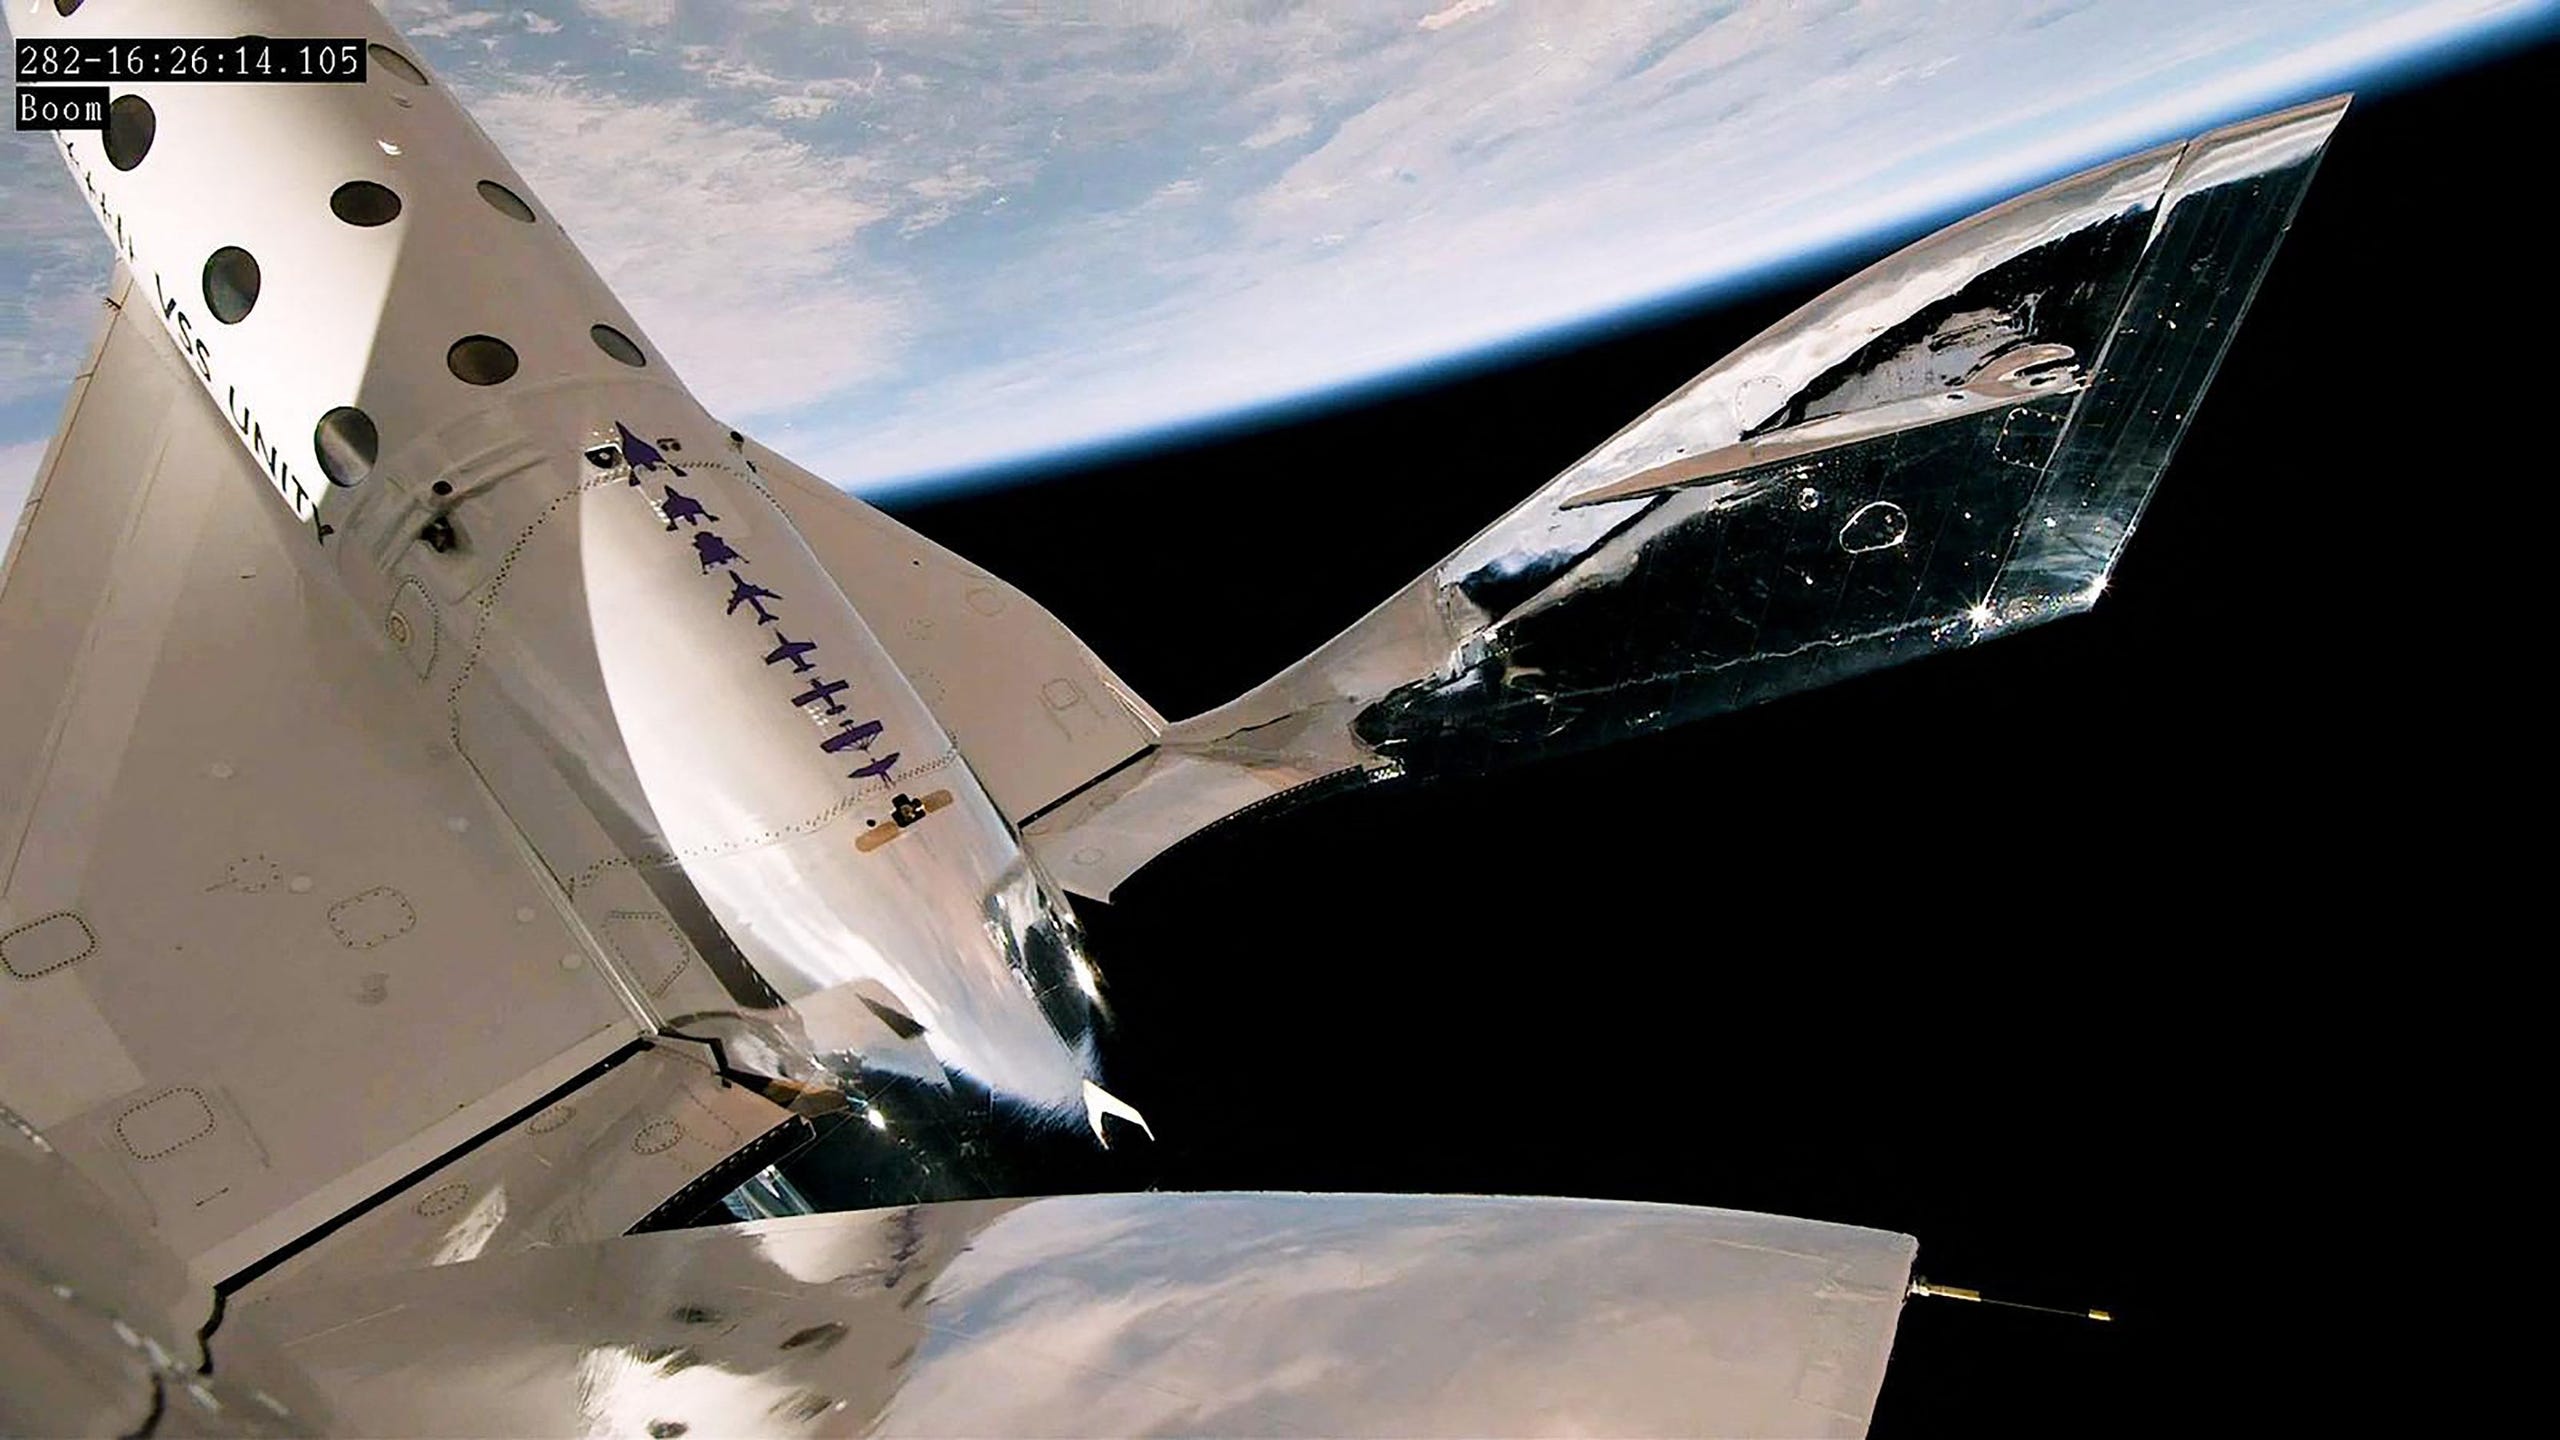 This image released by Virgin Galactic shows the company's Unity spacecraft during the May 25, 2023, Unity 25 mission. Virgin Galactic successfully carried out its first spaceflight in nearly two years on May 25, the company said, after an "enhancement period" to make safety upgrades to its fleet. It was the fifth time the space tourism company brushed the boundary of space, and has been billed as the final test before commercial operations can begin in late June, with members of the Italian Air Force as the first paying customers.